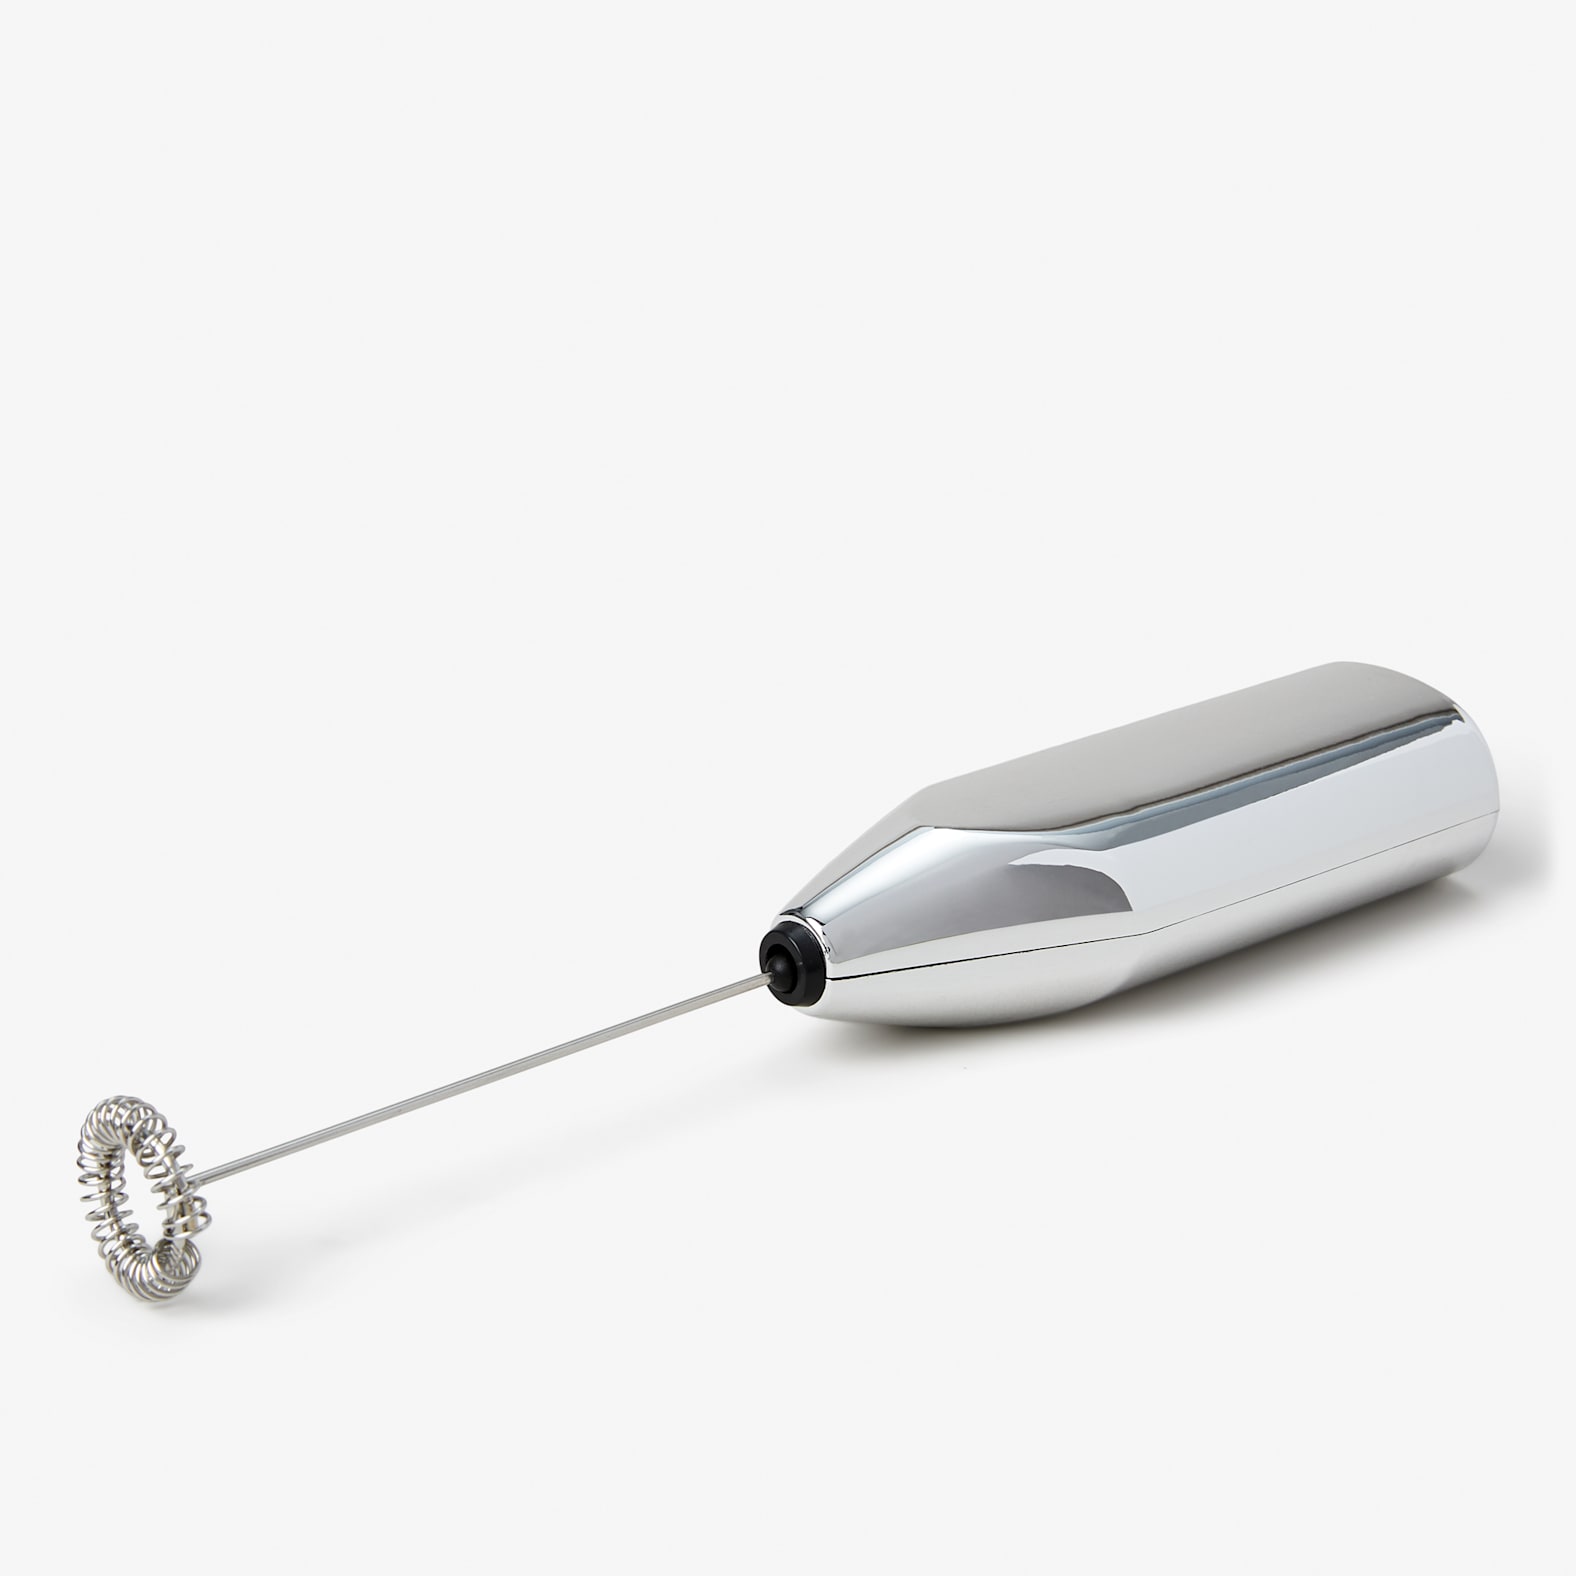 Primula Chrome Finish Milk Frother Foamer create Lattes, Cappuccinos and  More